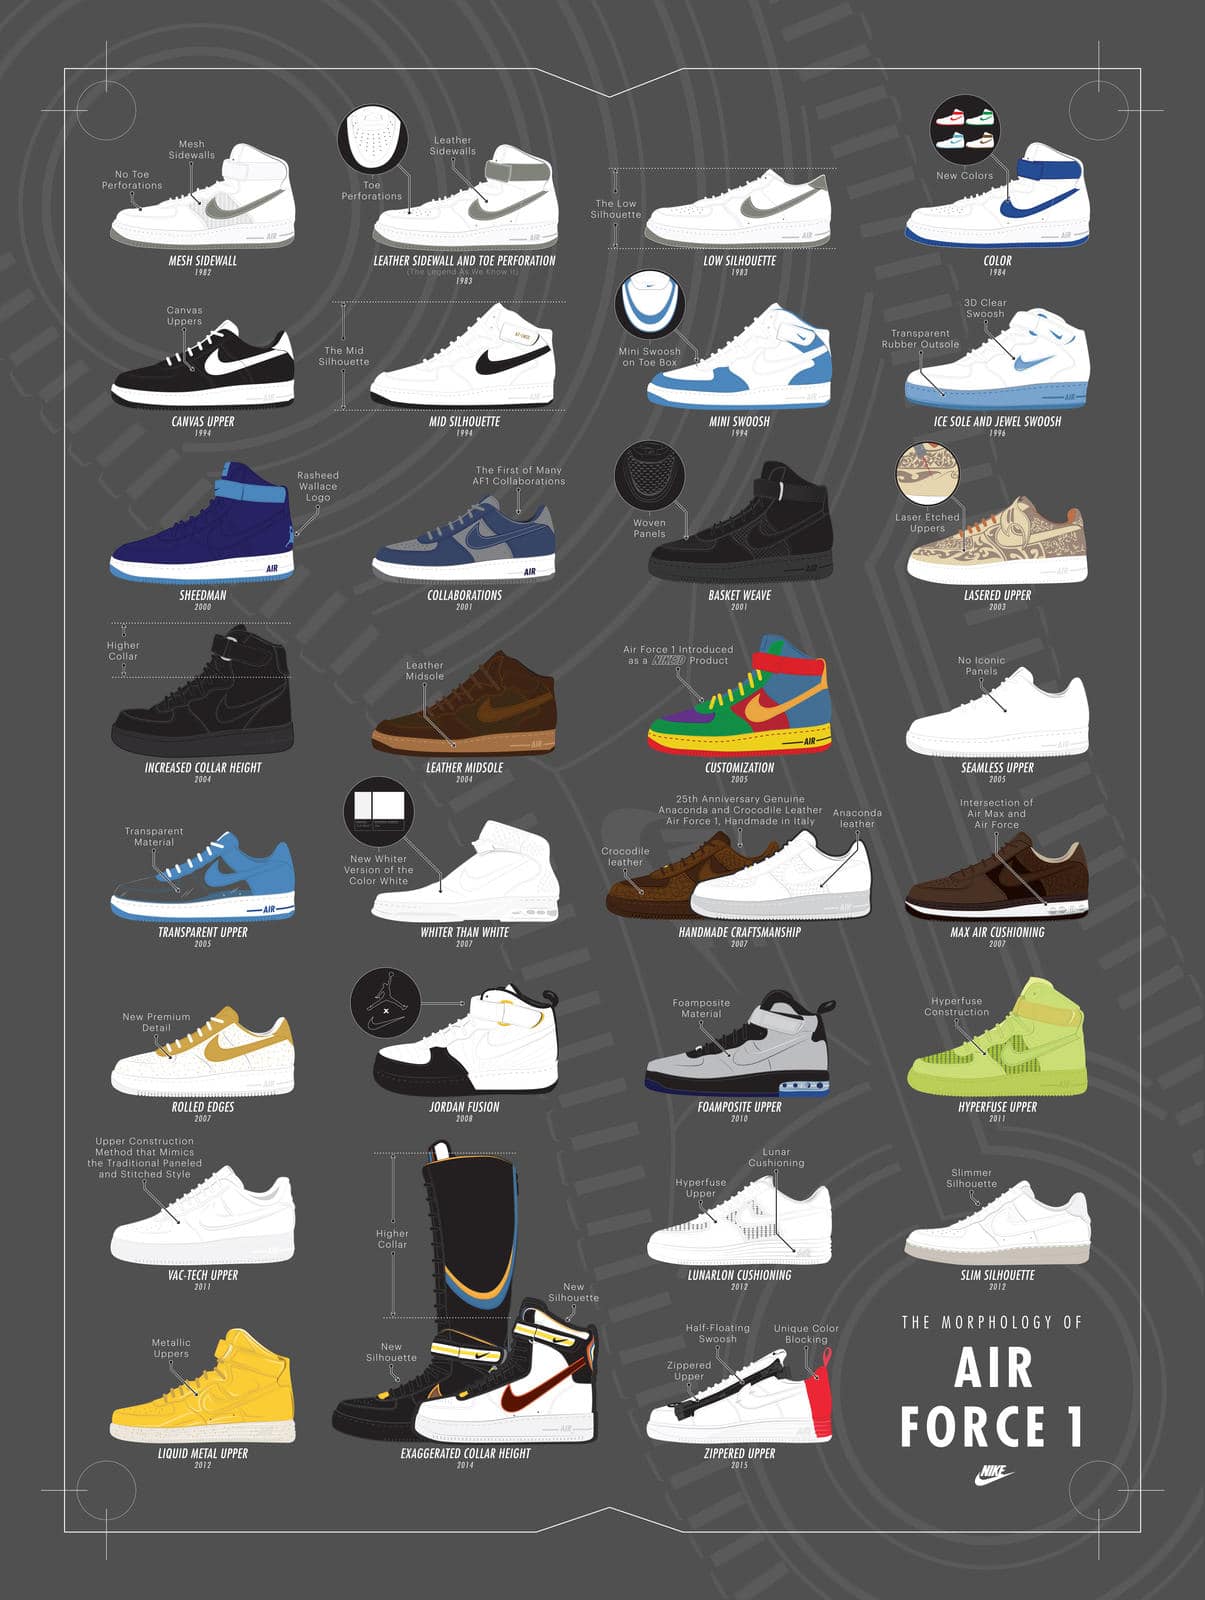 Nike_Morphology_of_Air_Force_1_-_Poster_native_1600